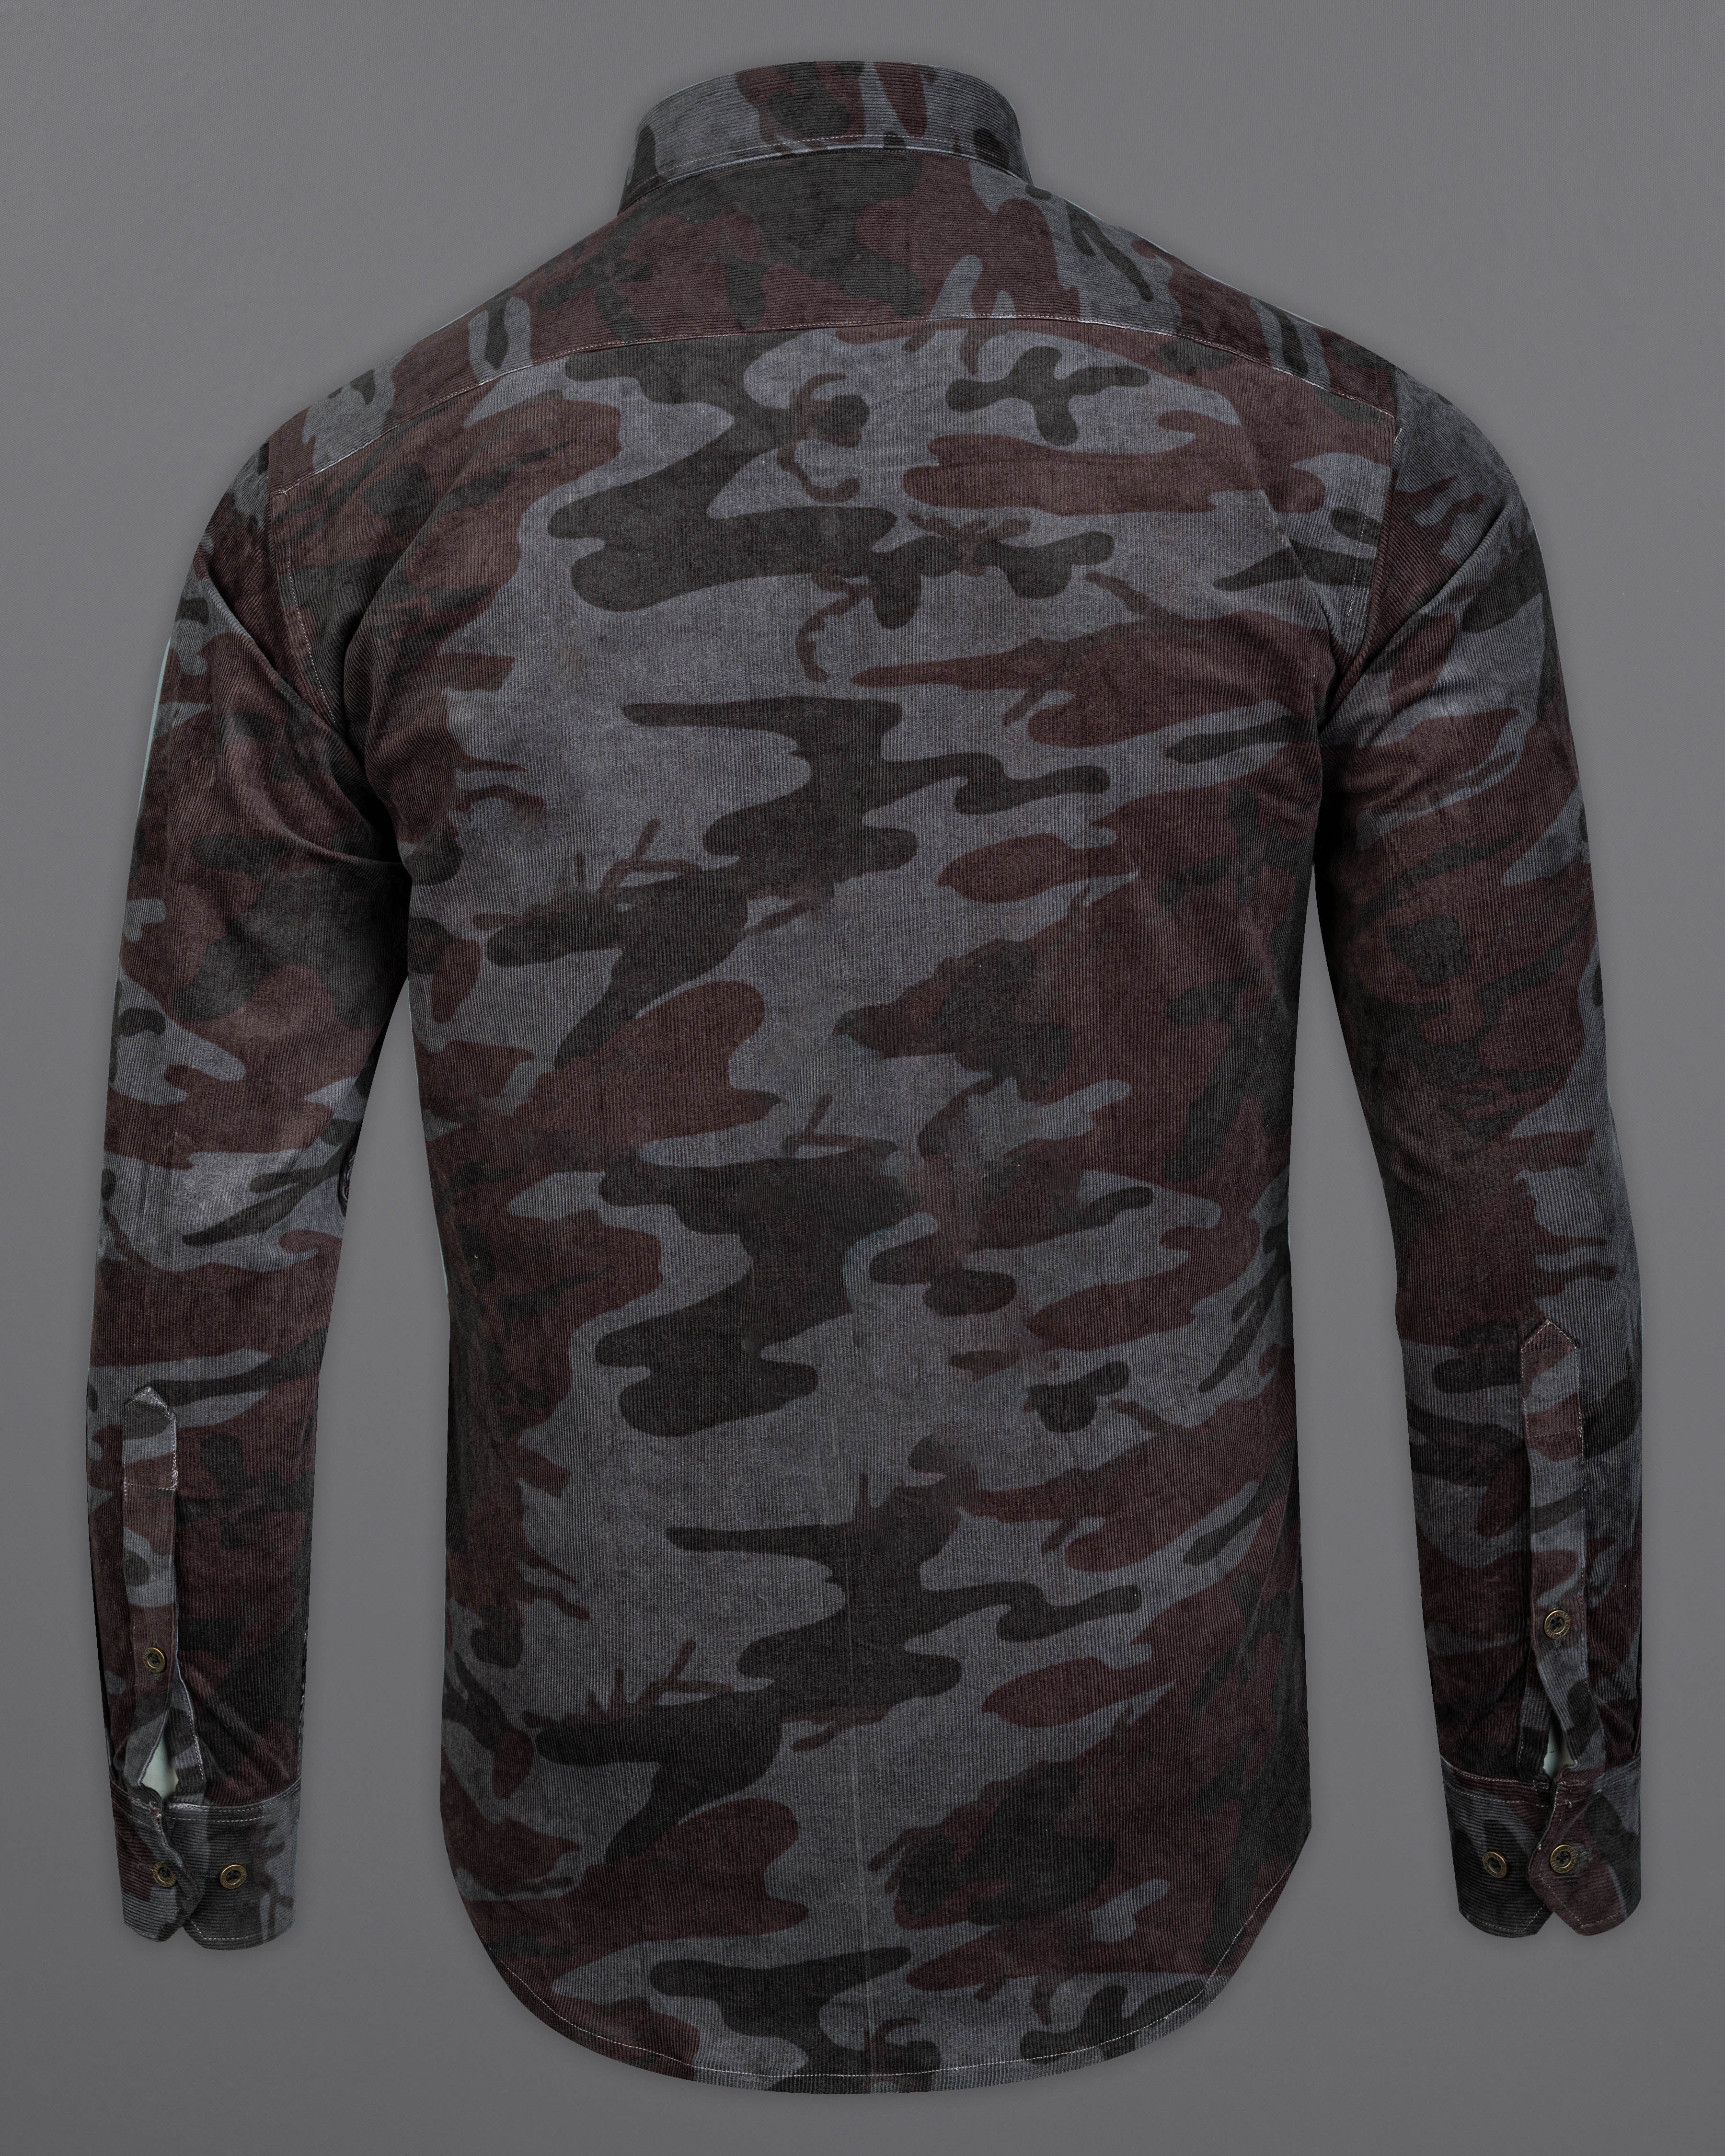 Cape Cod Gray and Bistre Brown Camouflage Corduroy Designer Shirt 10174-BD-MB-D123-38, 10174-BD-MB-D123-H-38, 10174-BD-MB-D123-39, 10174-BD-MB-D123-H-39, 10174-BD-MB-D123-40, 10174-BD-MB-D123-H-40, 10174-BD-MB-D123-42, 10174-BD-MB-D123-H-42, 10174-BD-MB-D123-44, 10174-BD-MB-D123-H-44, 10174-BD-MB-D123-46, 10174-BD-MB-D123-H-46, 10174-BD-MB-D123-48, 10174-BD-MB-D123-H-48, 10174-BD-MB-D123-50, 10174-BD-MB-D123-H-50, 10174-BD-MB-D123-52, 10174-BD-MB-D123-H-52